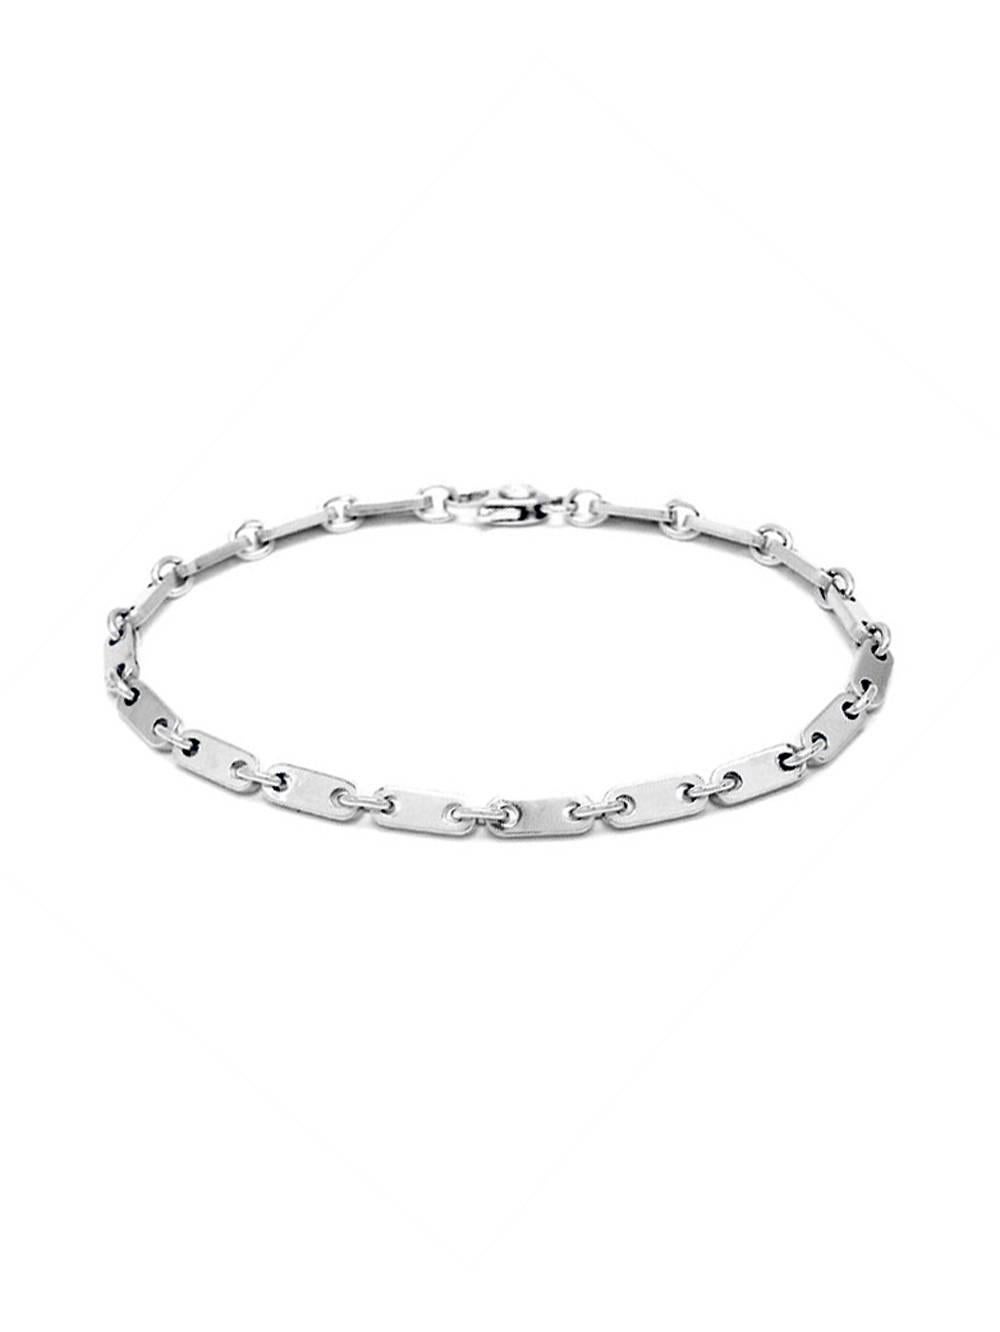 A fabulous Cartier chain link bracelet crafted in 18k white gold.

Weight: 10.7 Grams
Length: 7.09 Inches

Inventory ID: 0000062

